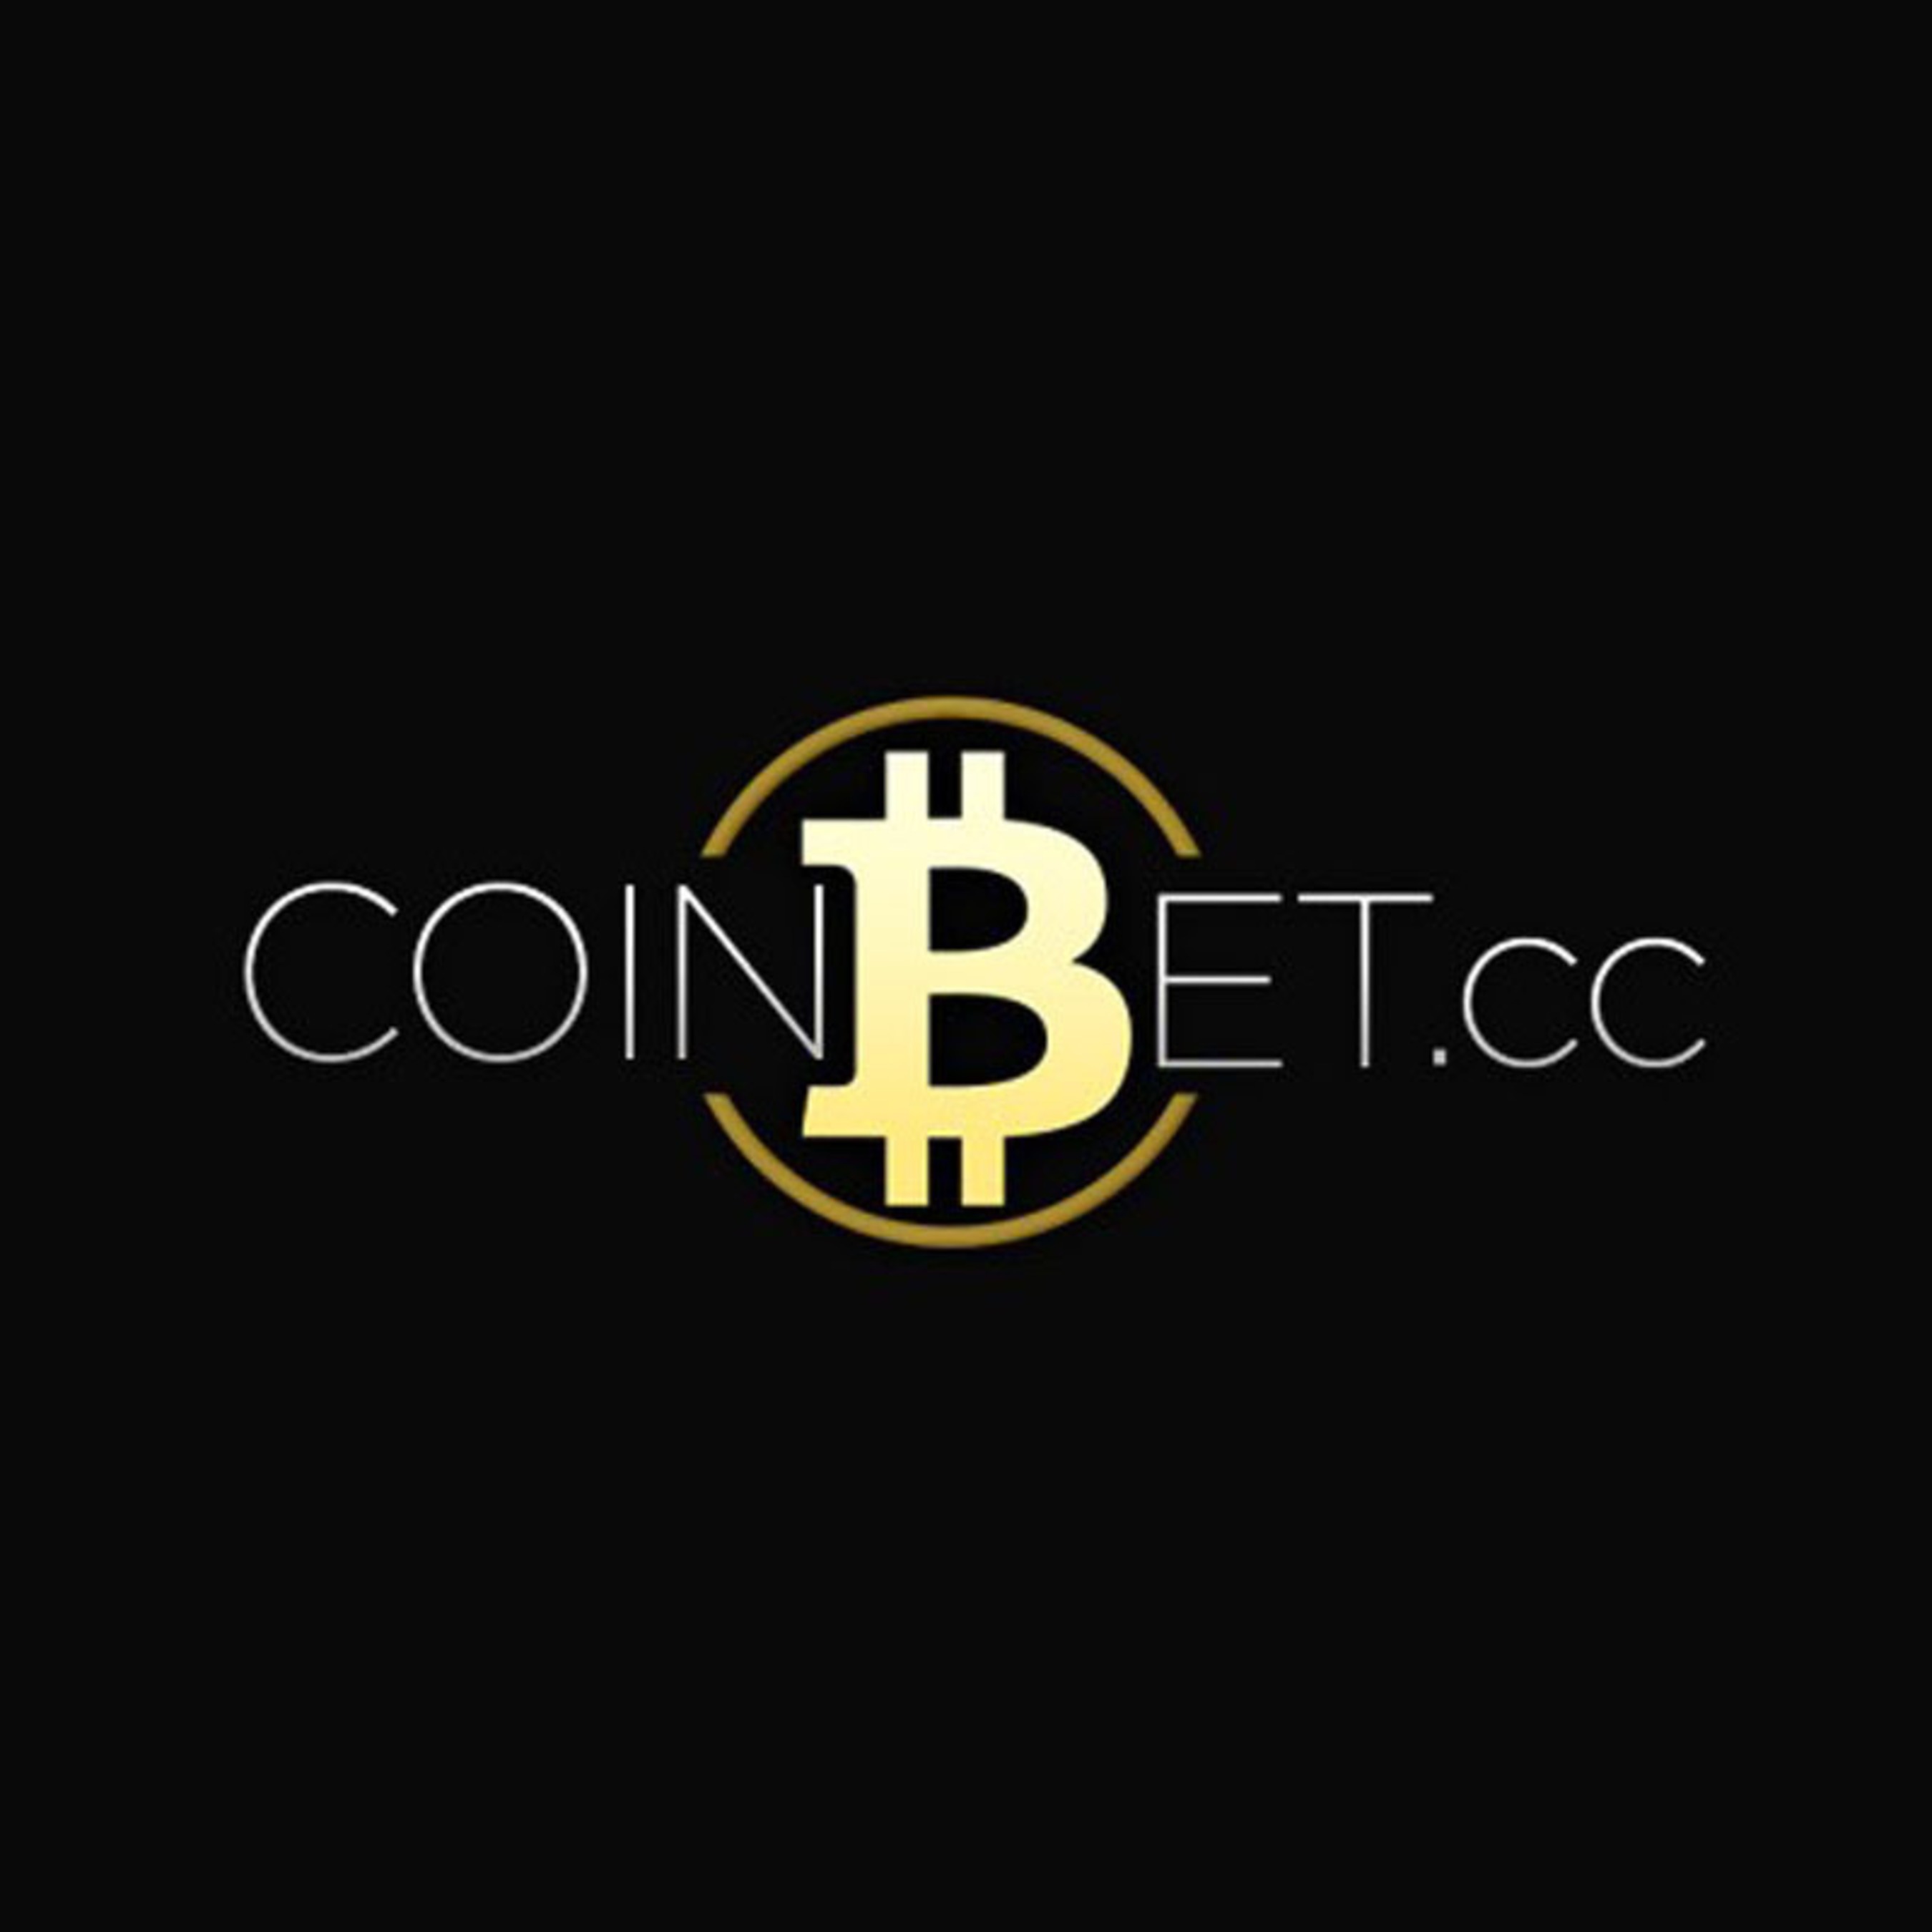 Voted #1 bitcoin based online sportsbook and casino. (PRNewsFoto/CoinBet Interactive Gaming, S.A) (PRNewsFoto/COINBET INTERACTIVE GAMING, S.A)